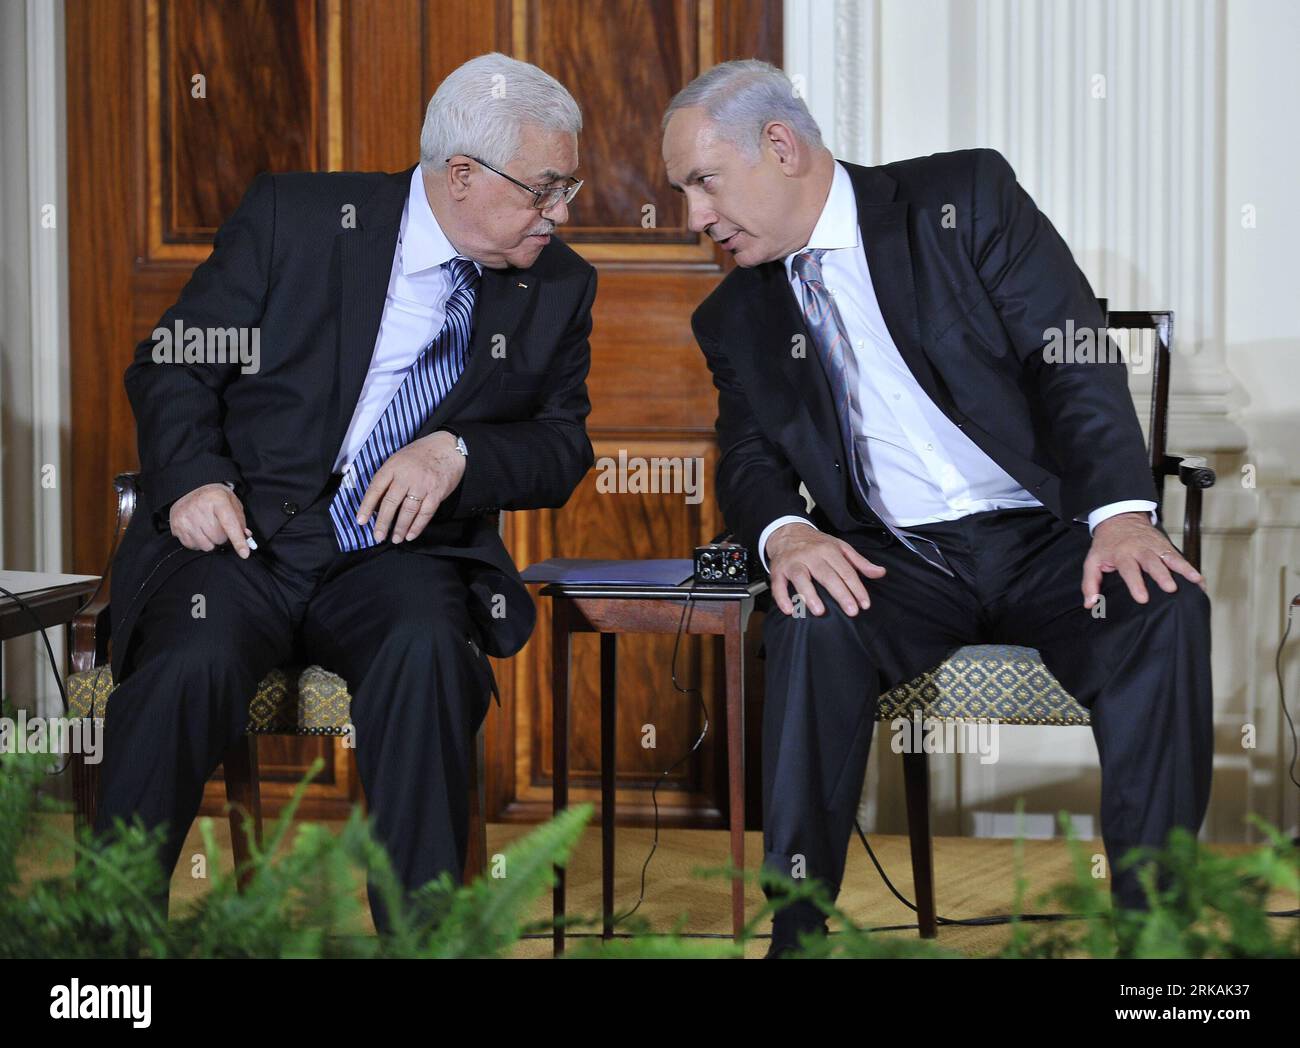 100902 -- WASHINGTON, Sept. 2, 2010 Xinhua -- Palestinian National Authority PNA Chairman Mahmoud Abbas L talks with Israeli Prime Minister Benjamin Netanyahu during a press conference about the Middle East peace talks at the East Room of the White House in Washington D.C., capital of the United States, Sept. 1, 2010. Xinhua/Zhang Jun msq U.S.-WASHINGTON-MIDEAST TALKS-PRESS CONFERENCE PUBLICATIONxNOTxINxCHN Stock Photo